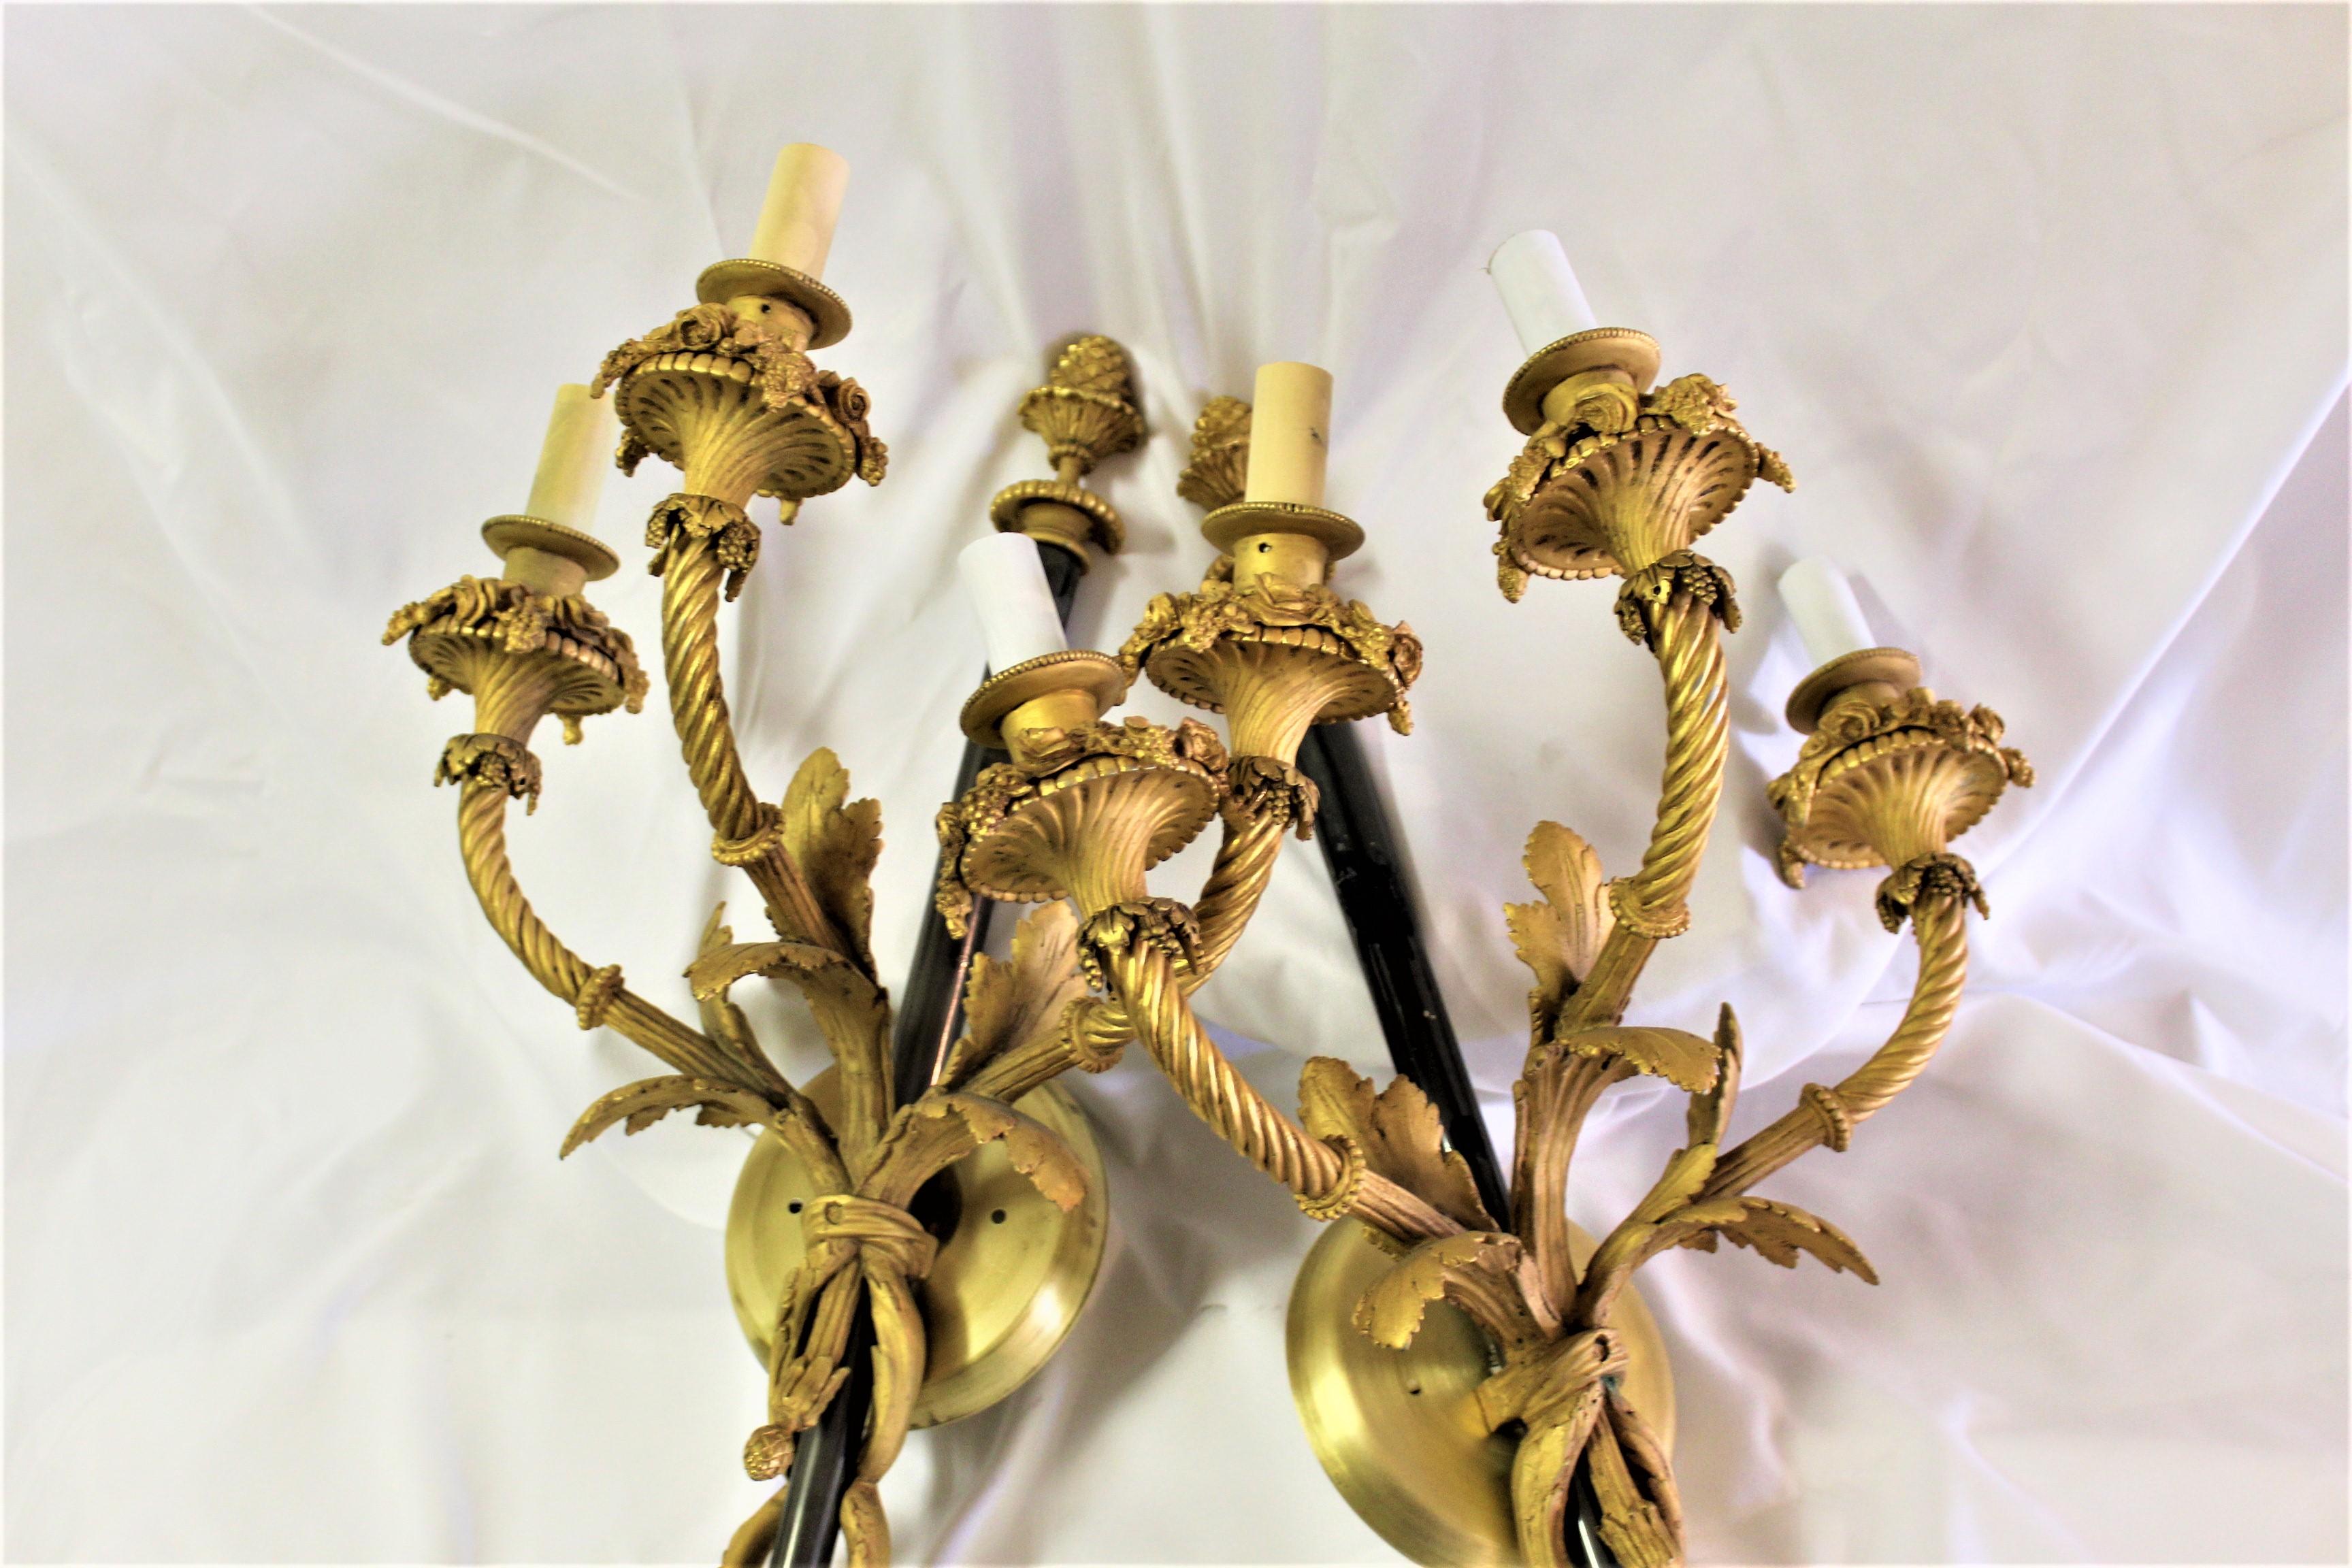 A Larger pair of Empire Looking style sconces  They are of hi-quality lost wax Bronze castings with fine detailing .  With polished 18-karat gold plated finish in Antique. Center shaft is steel in black powder coated finish. Wired and ready.